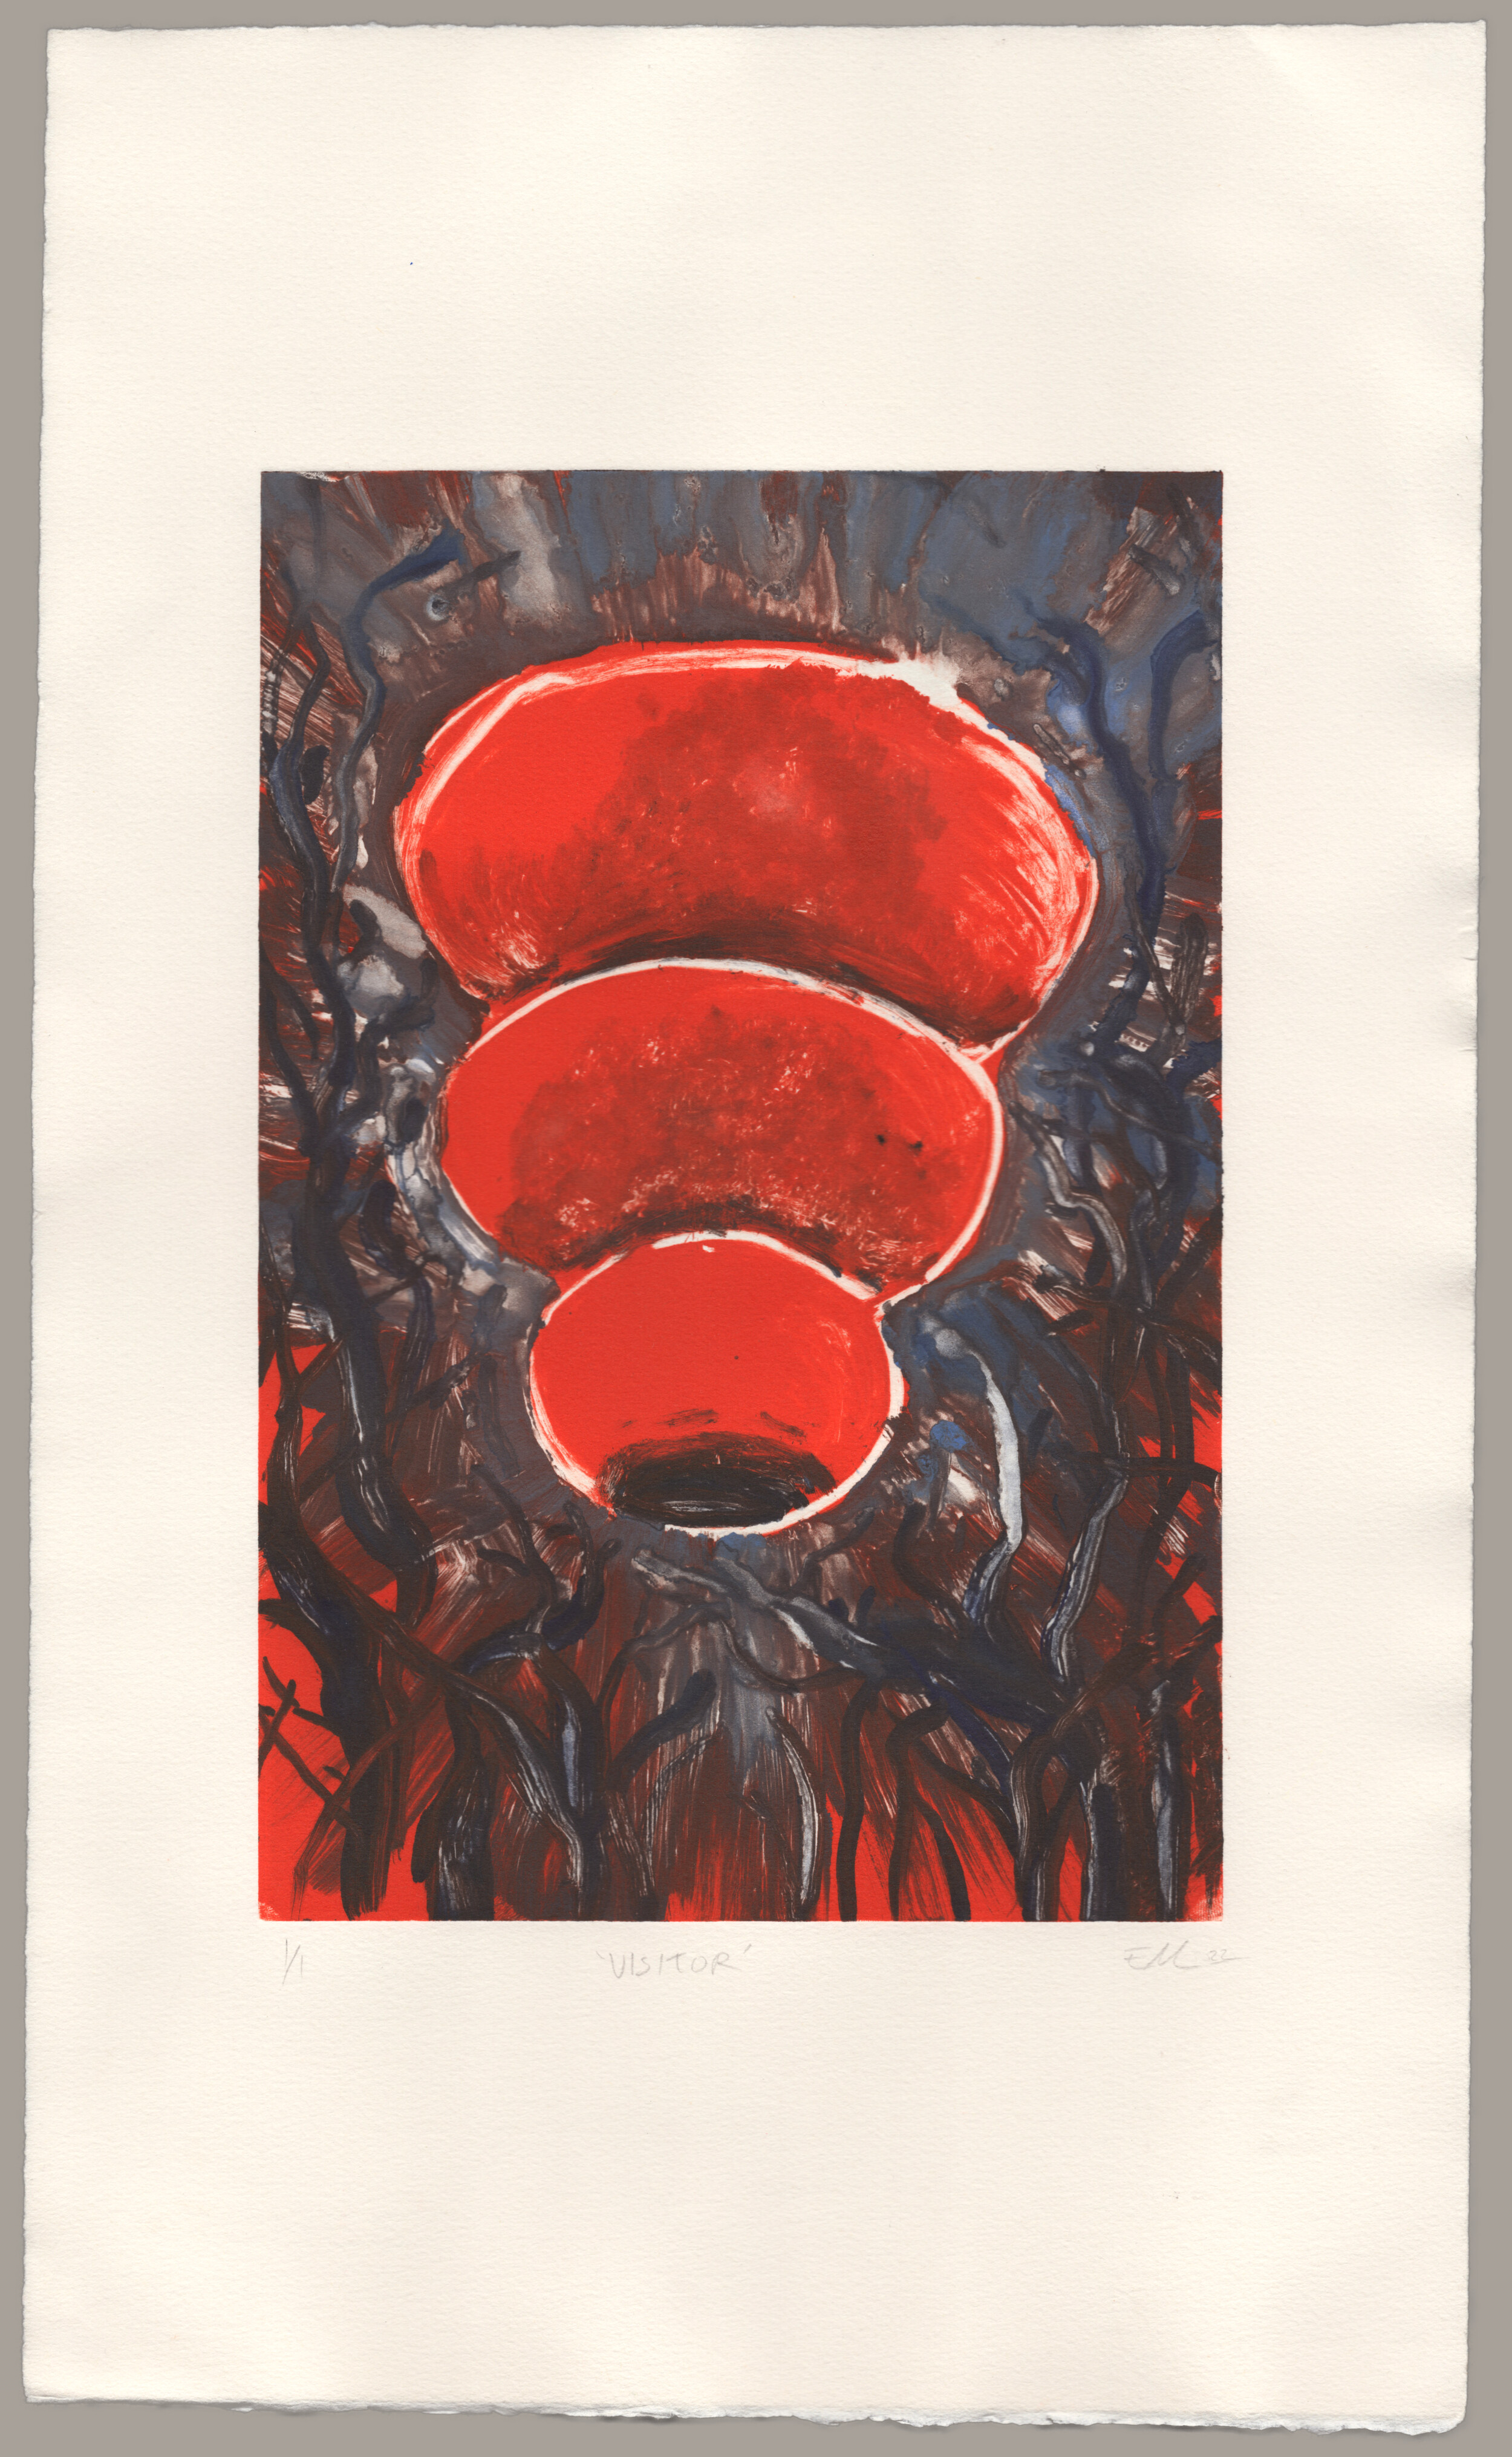 A monotype print of a bright red Kong dog toy floating, tip down, against an abstract background of dark gnarled trees or smoke in a red sky. The Kong dominates the image and appears to be glowing and radiating energy. The print is signed: '1 of 1, Visitor, EM 22'